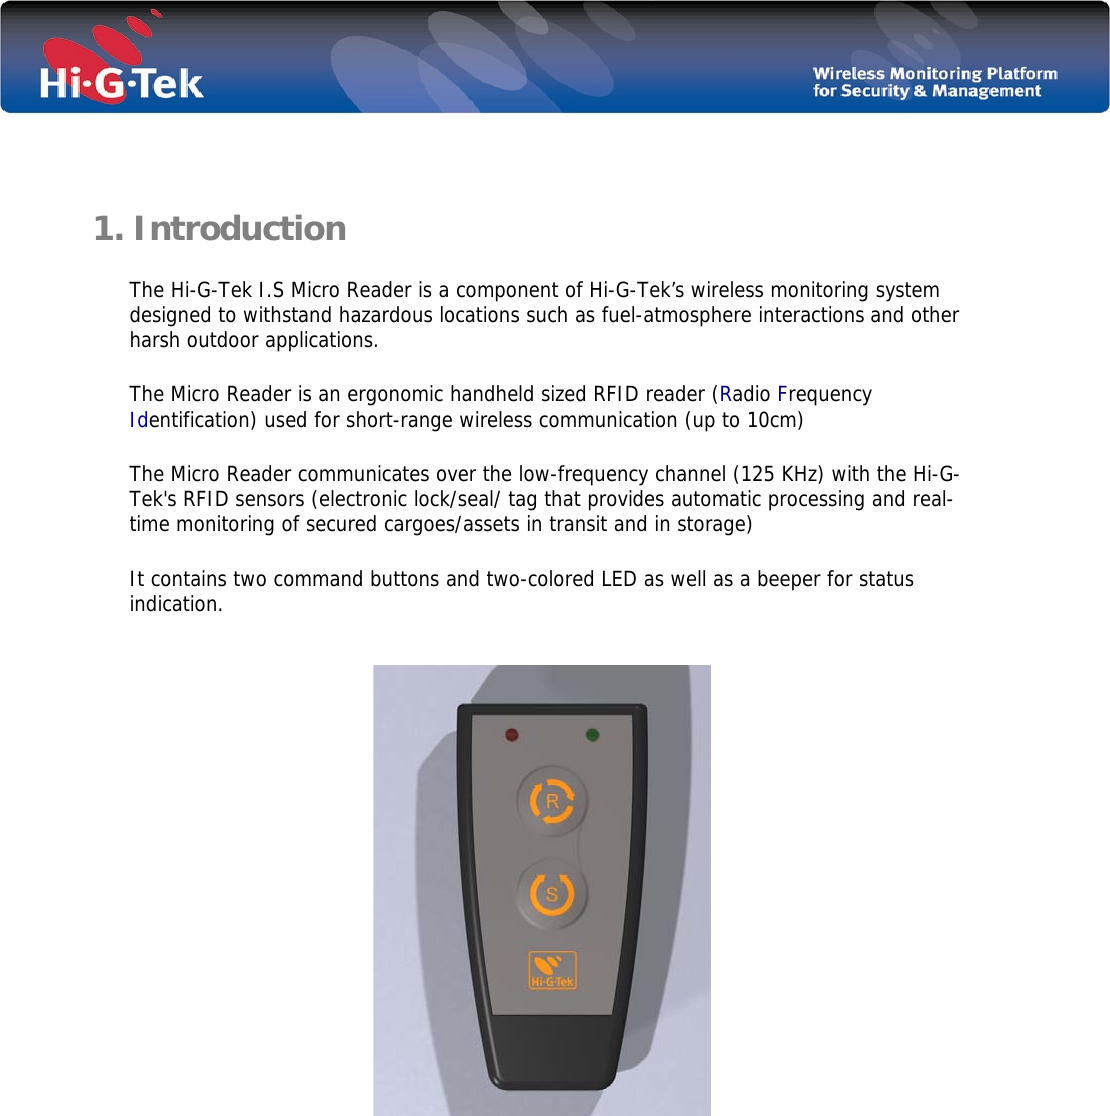        1. Introduction  The Hi-G-Tek I.S Micro Reader is a component of Hi-G-Tek’s wireless monitoring system designed to withstand hazardous locations such as fuel-atmosphere interactions and other harsh outdoor applications. The Micro Reader is an ergonomic handheld sized RFID reader (Radio Frequency Identification) used for short-range wireless communication (up to 10cm)  The Micro Reader communicates over the low-frequency channel (125 KHz) with the Hi-G-Tek&apos;s RFID sensors (electronic lock/seal/ tag that provides automatic processing and real-time monitoring of secured cargoes/assets in transit and in storage) It contains two command buttons and two-colored LED as well as a beeper for status indication.                 